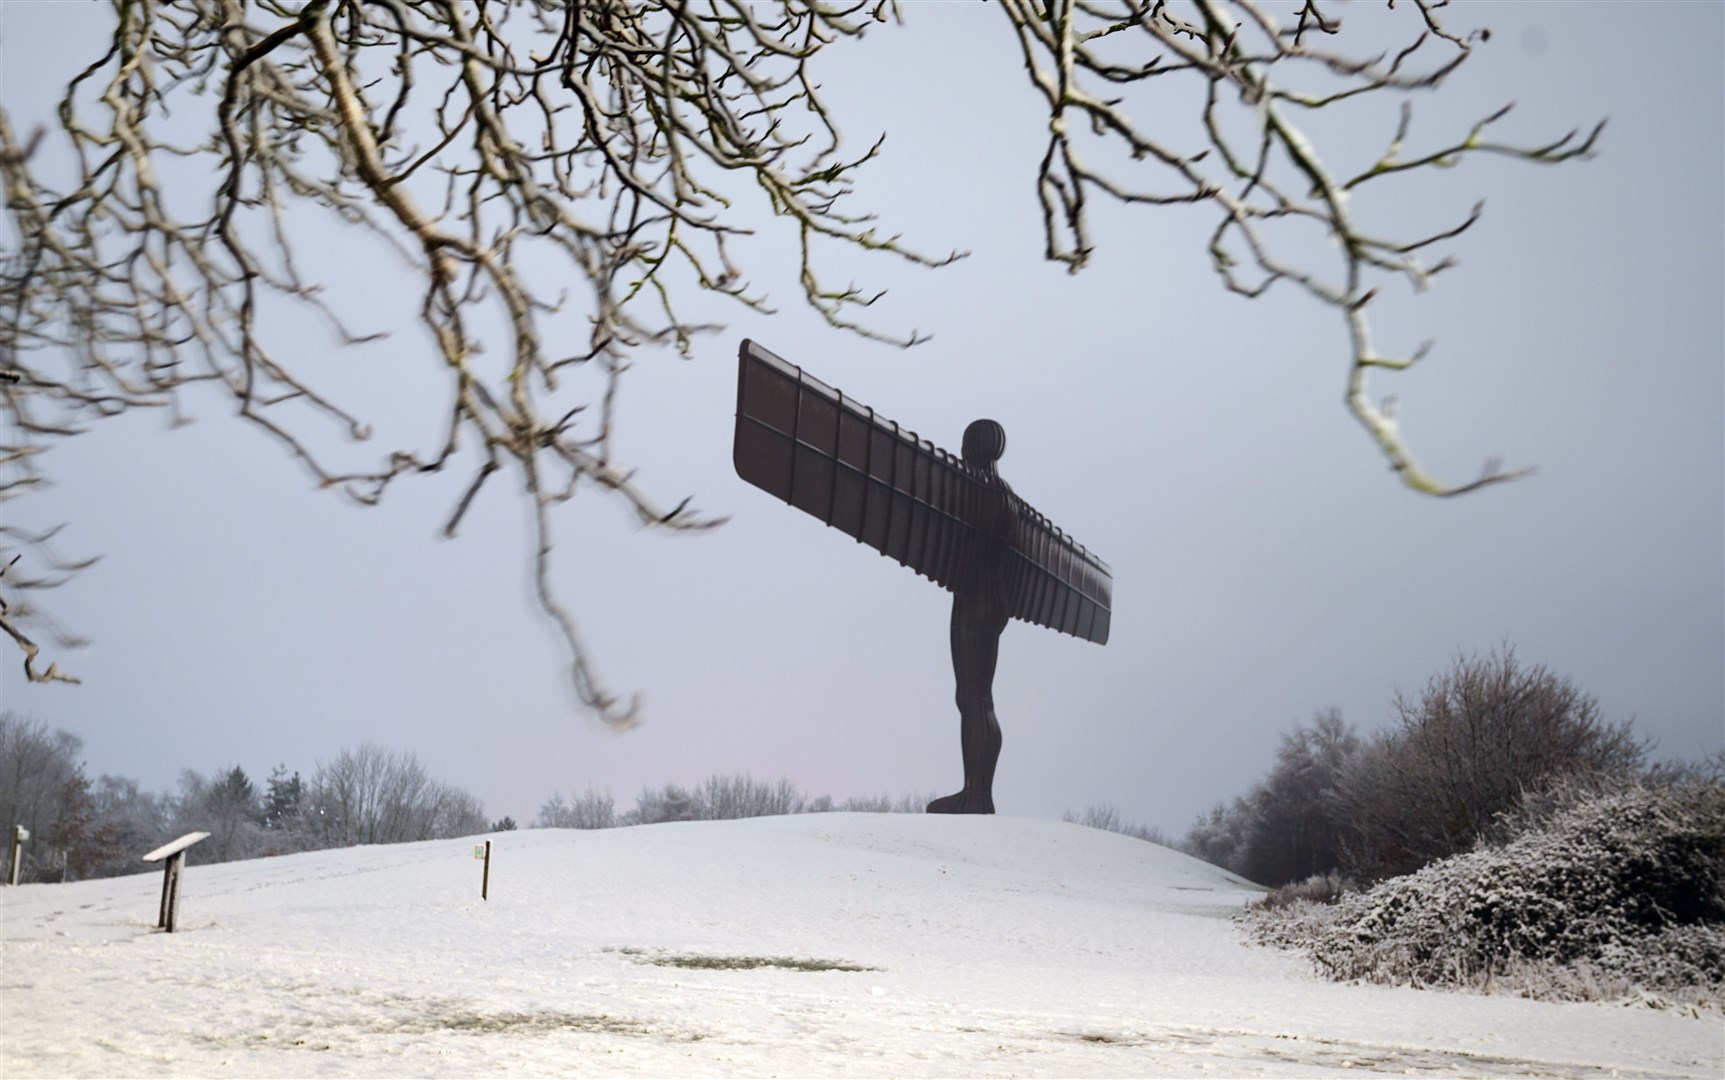 The Angel of the North in Gateshead was also dusted with snow (Owen Humphreys/PA)